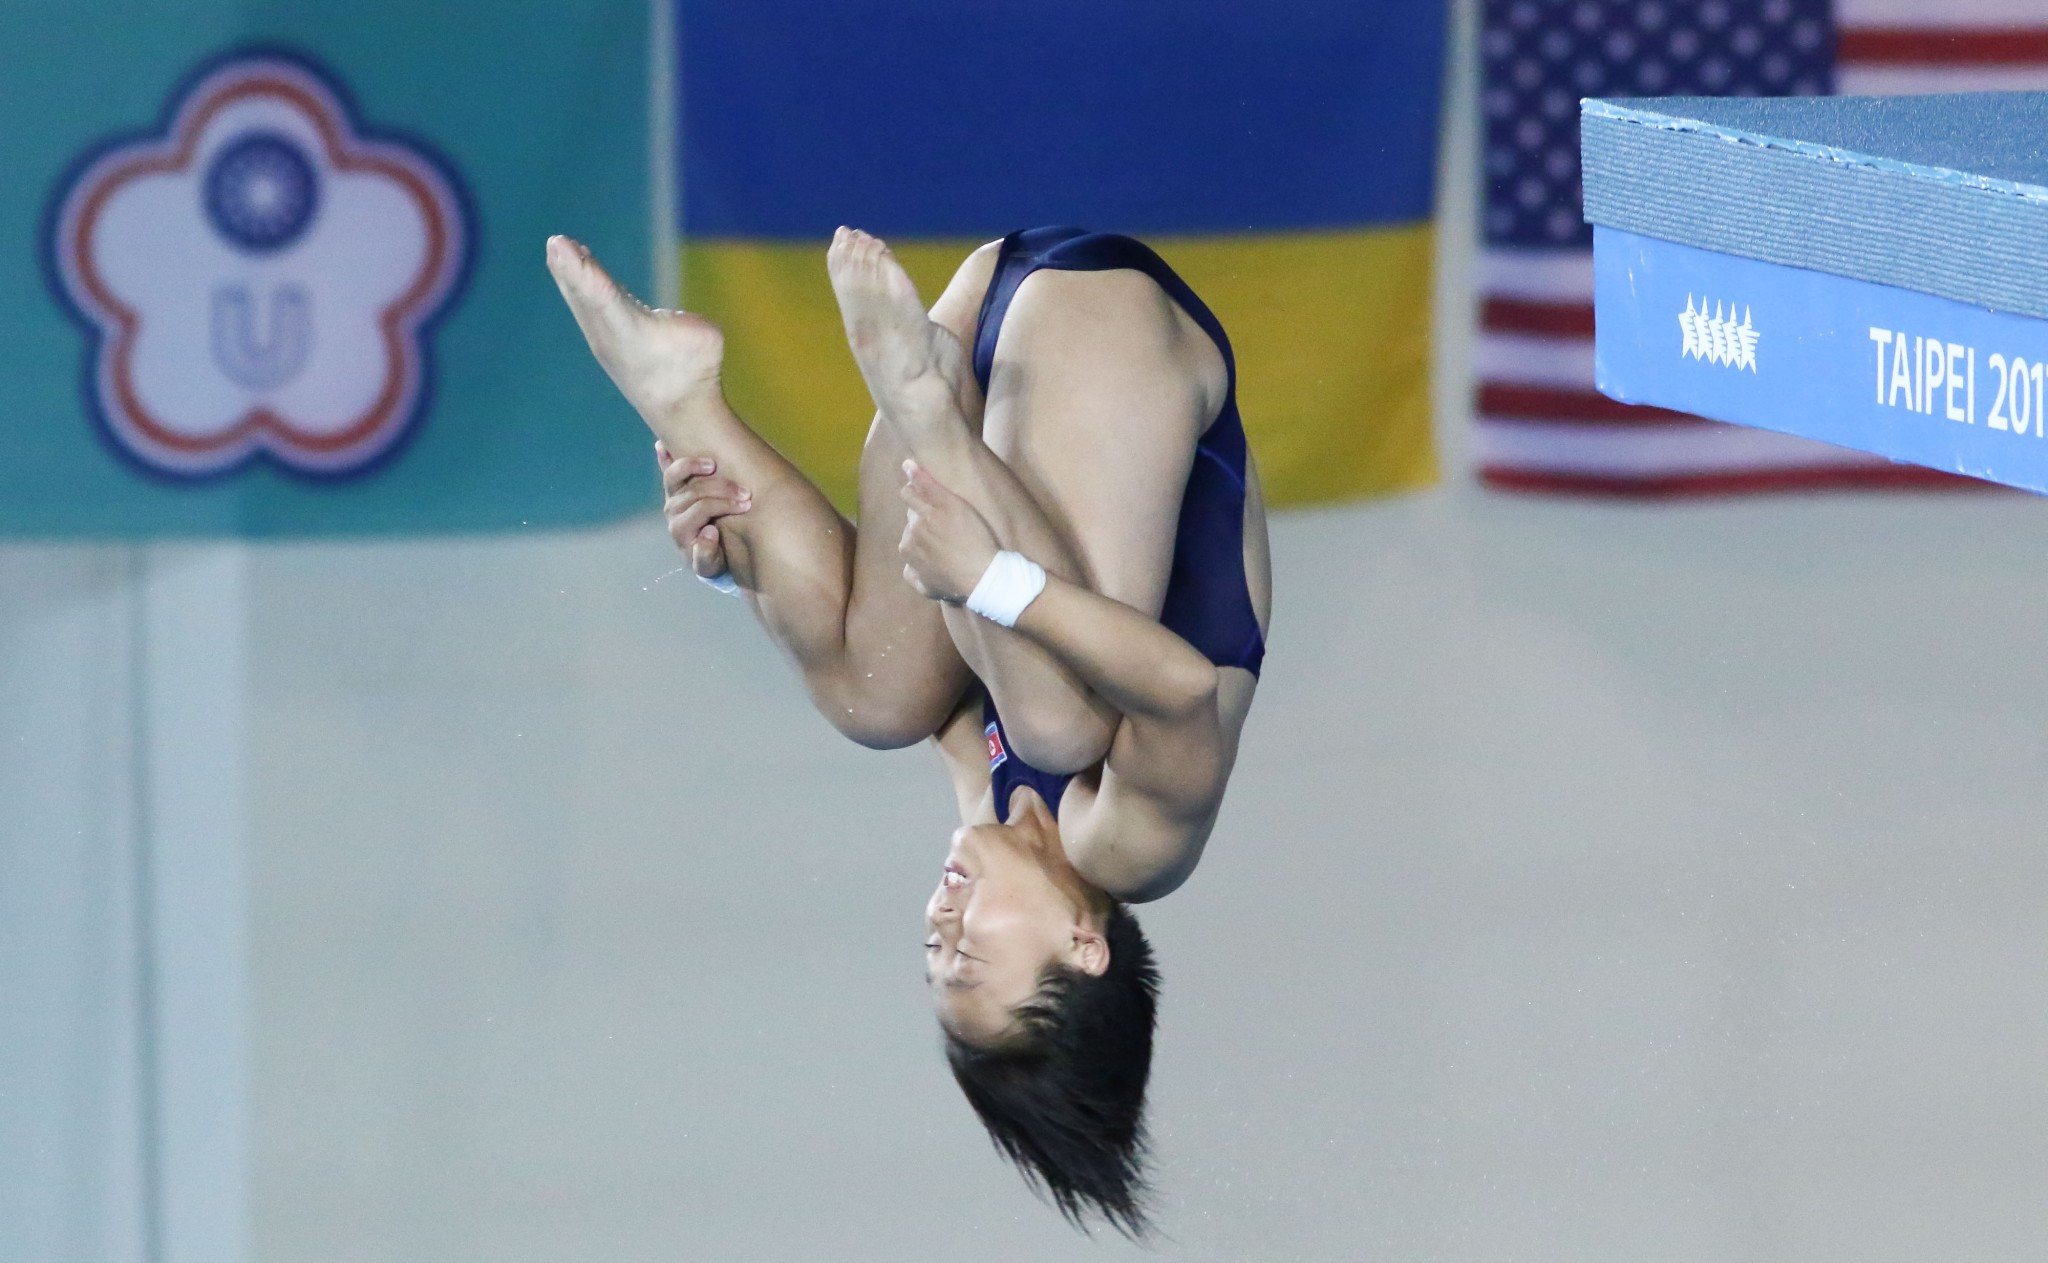 Kim Kuk Hyang was comfortably the winner in the women's platform event today ©Taipei 2017